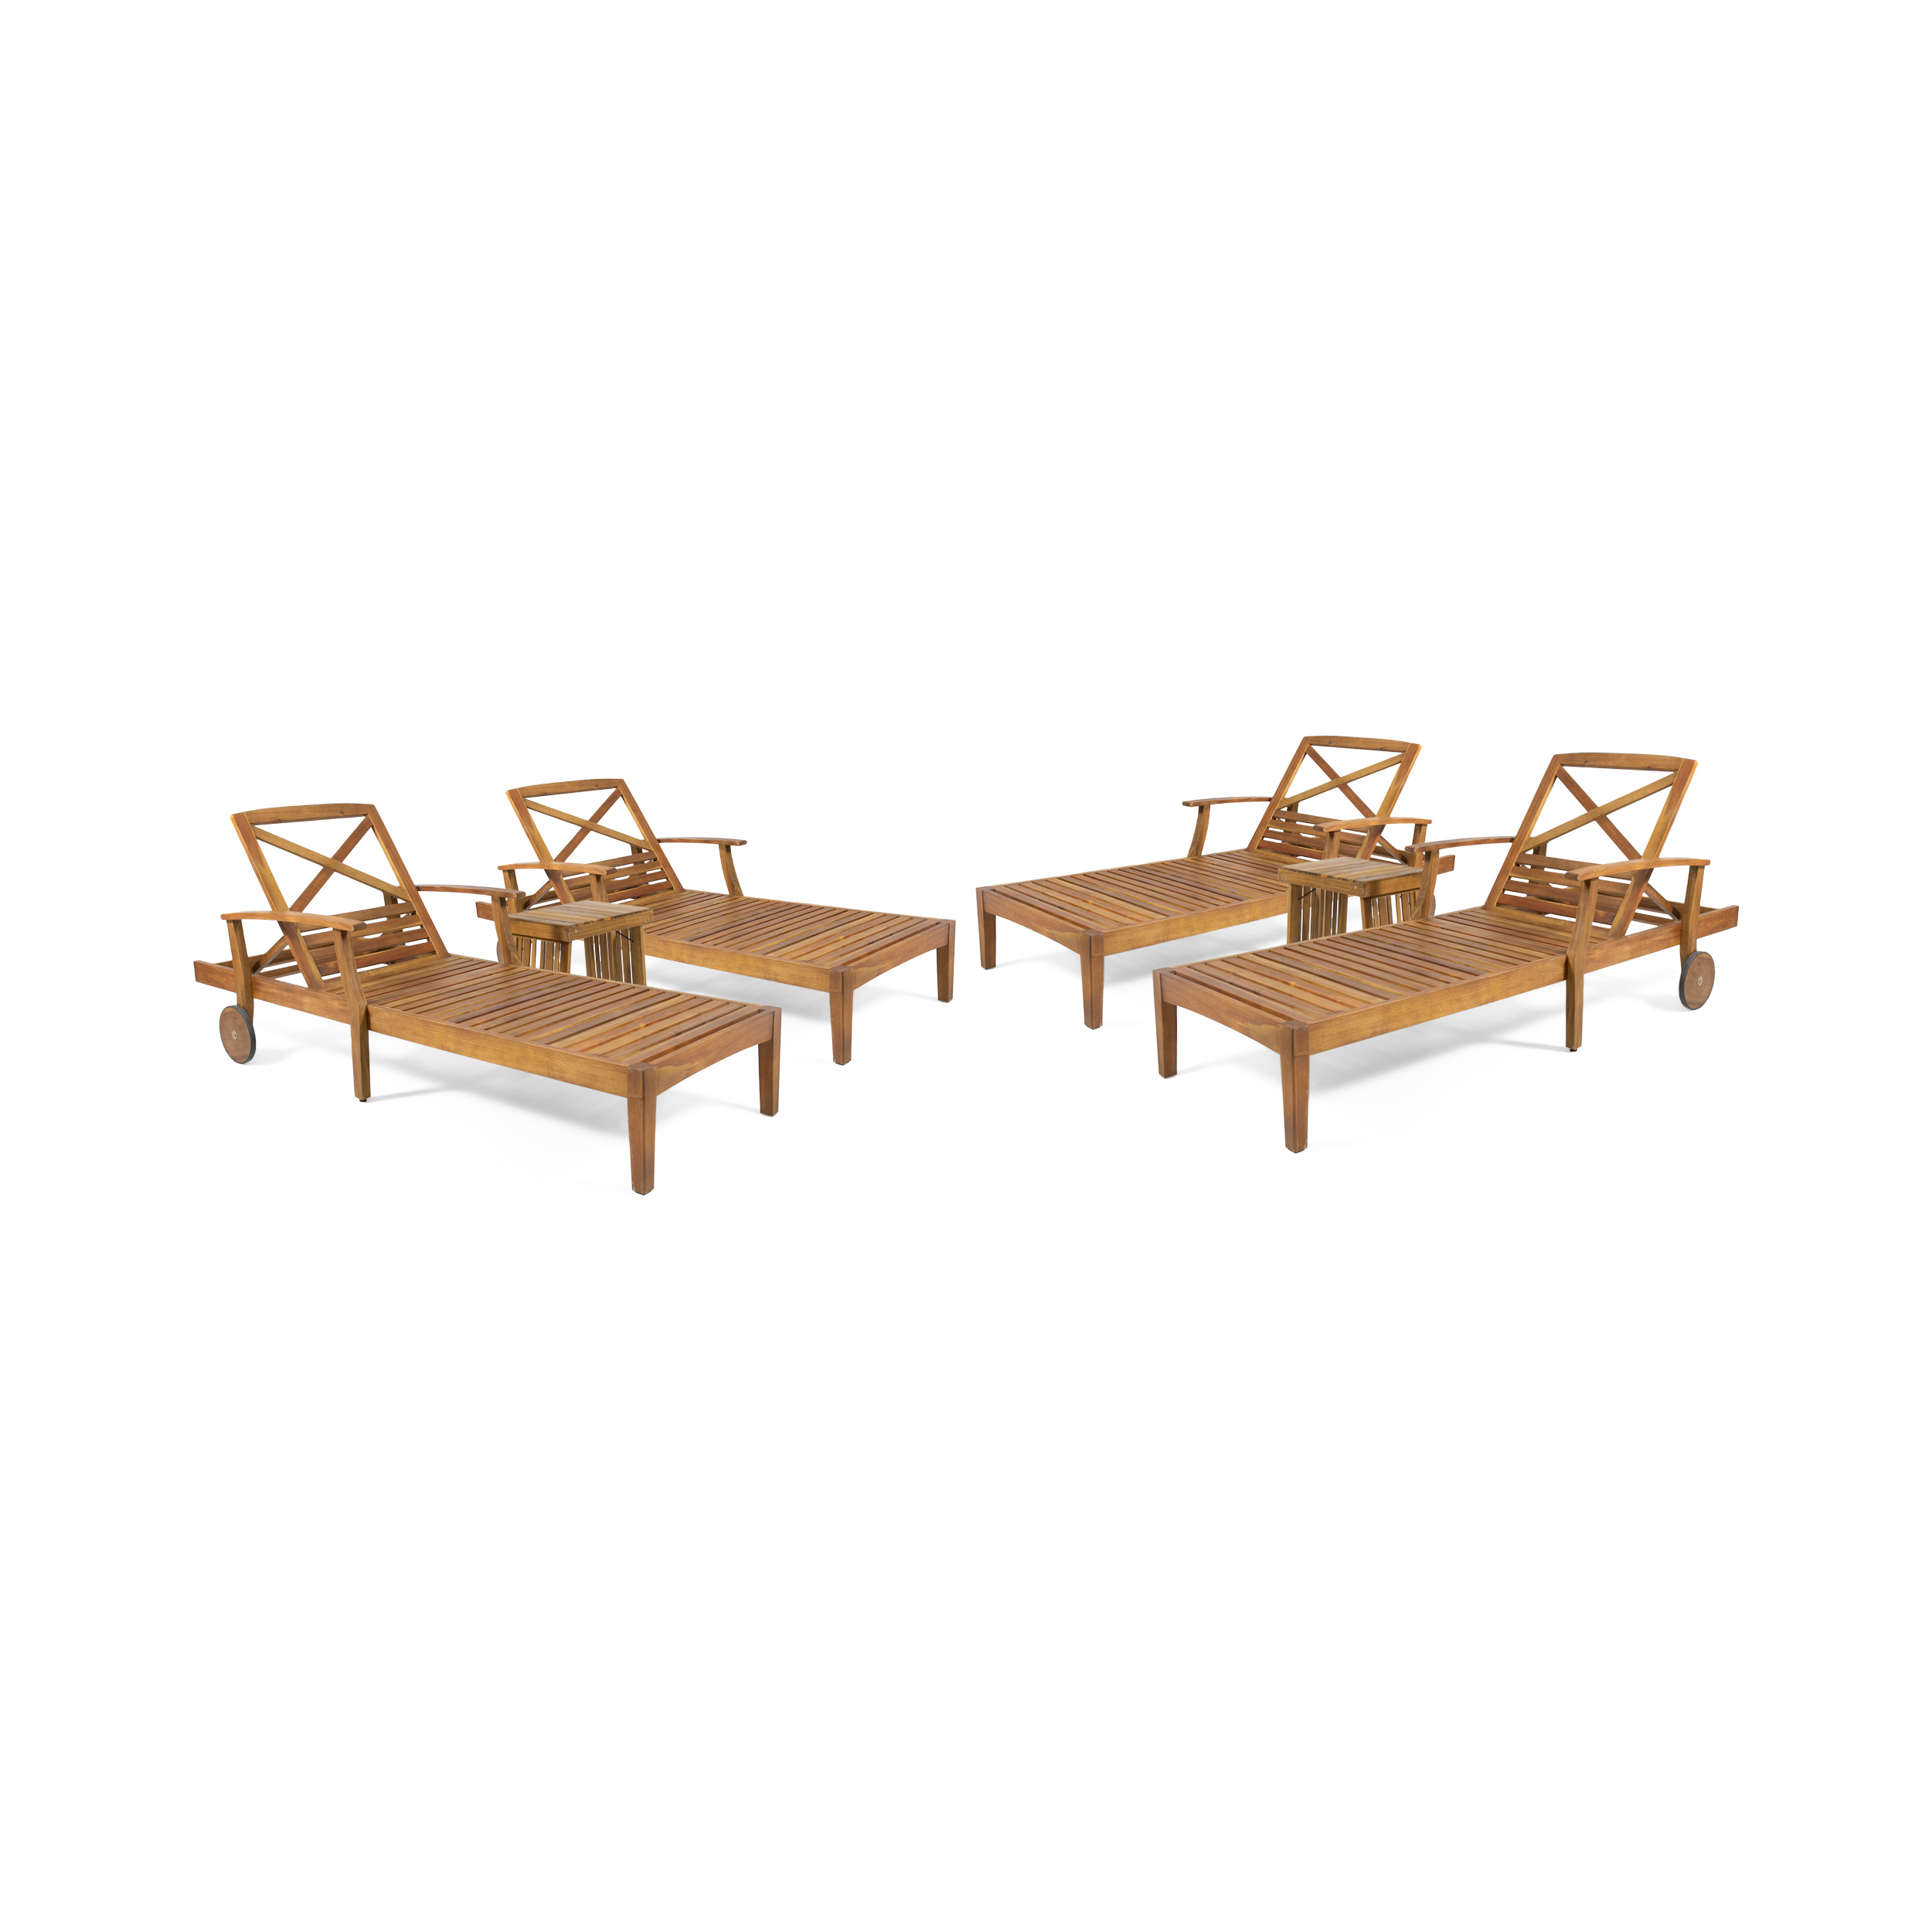 Noble House Forrest Acacia Wood Outdoor Chaise Lounge - Set of 4, Teak - image 1 of 10